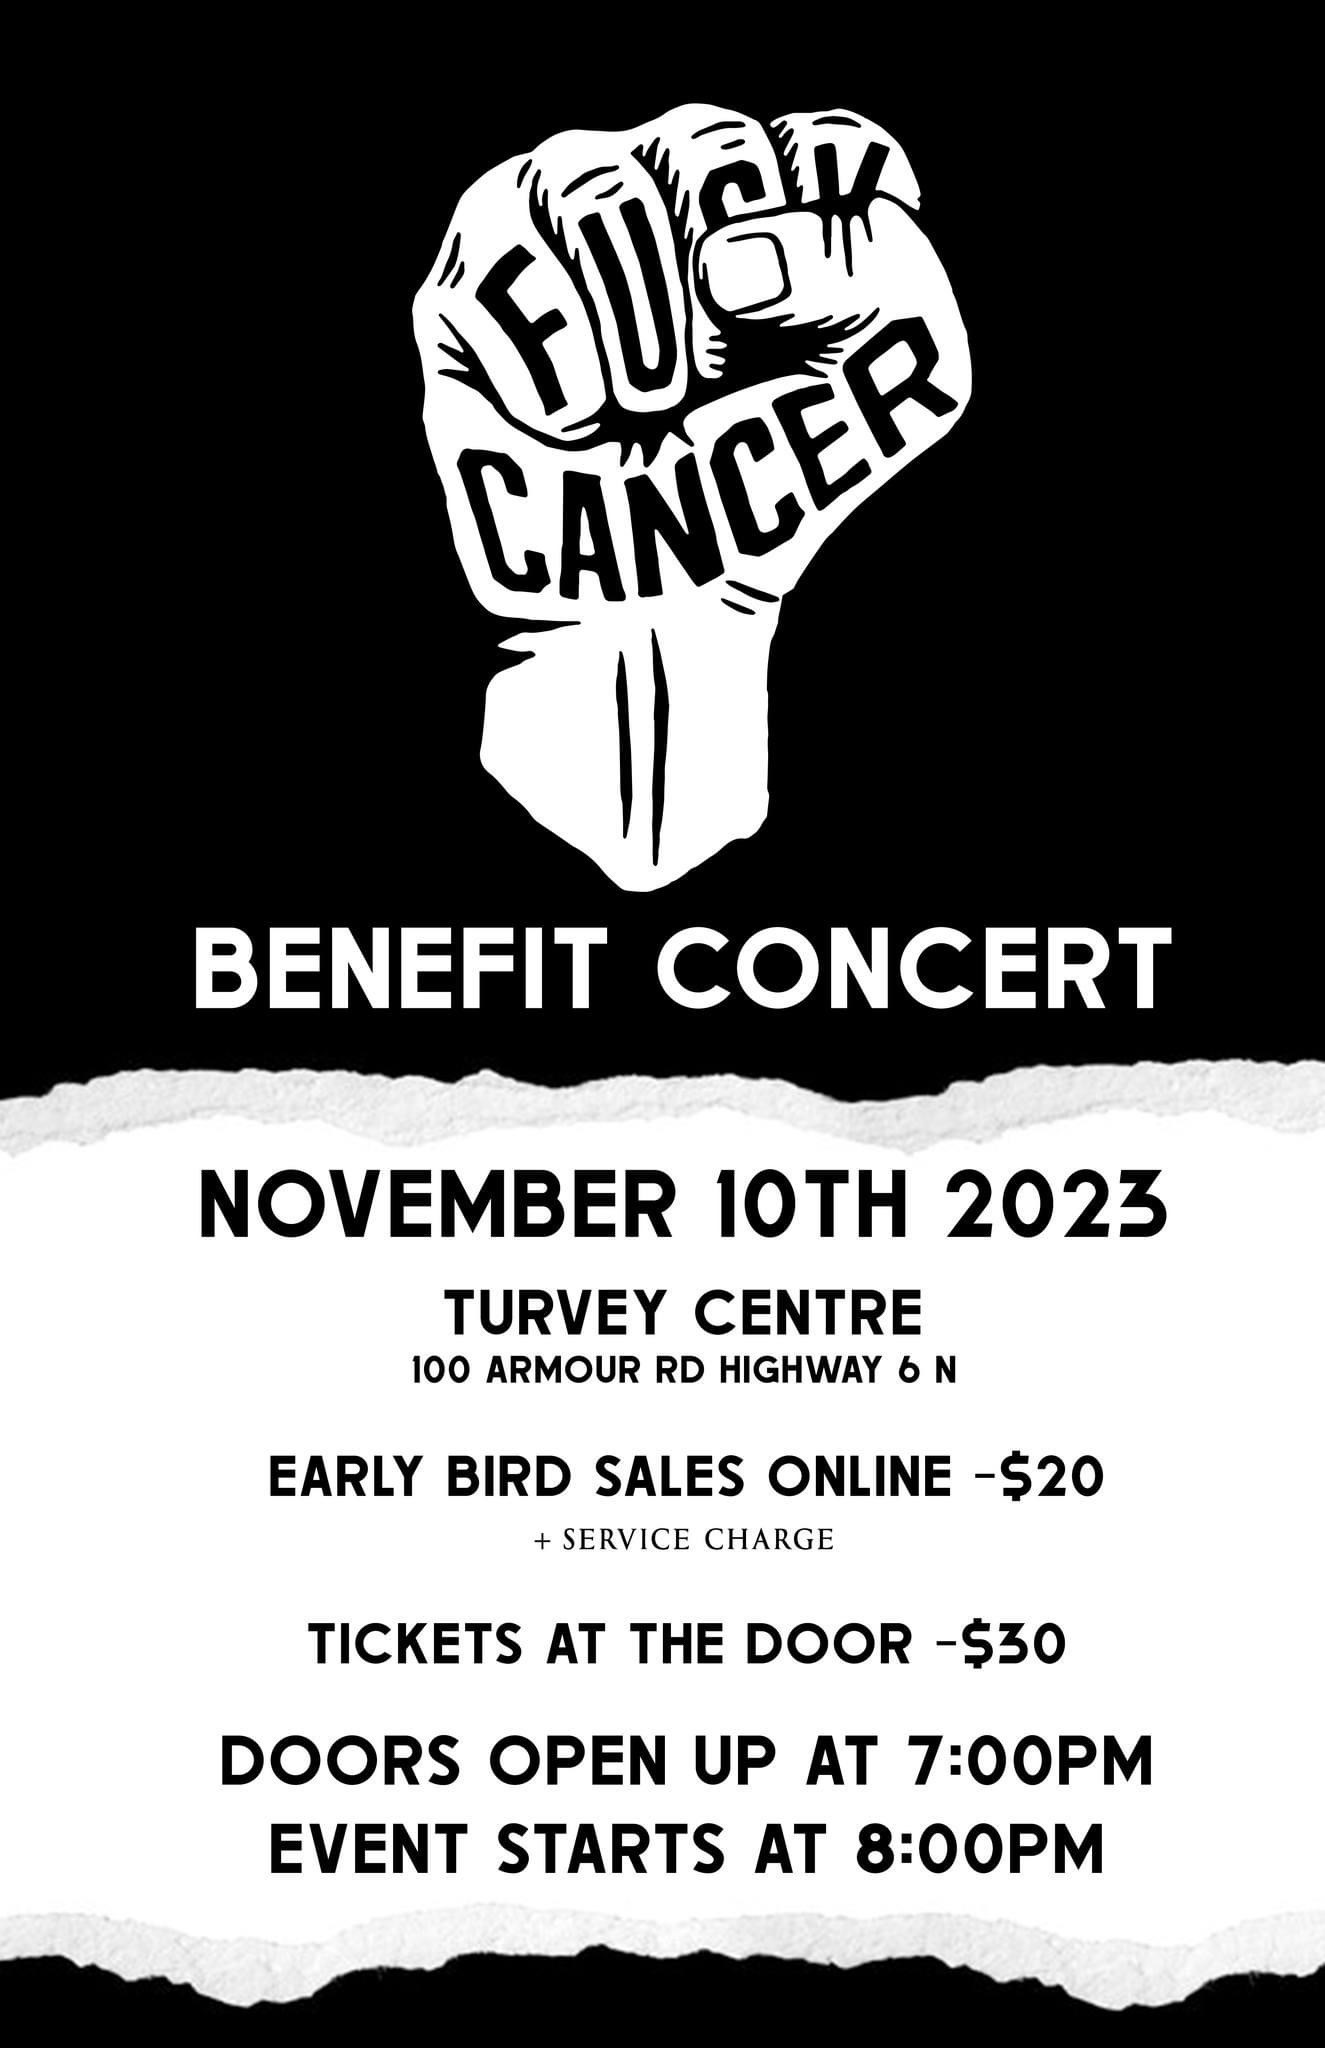 C MIDDLETON FAMILY BENEFIT CONCERT CROSBY HARLE BAND WITH GUESTS THE NEW MONTAQUES AND BRETT MICHAEL MONKA on Nov 10, 19:00@TURVEY Center - Buy tickets and Get information on Turvey Convention Center 